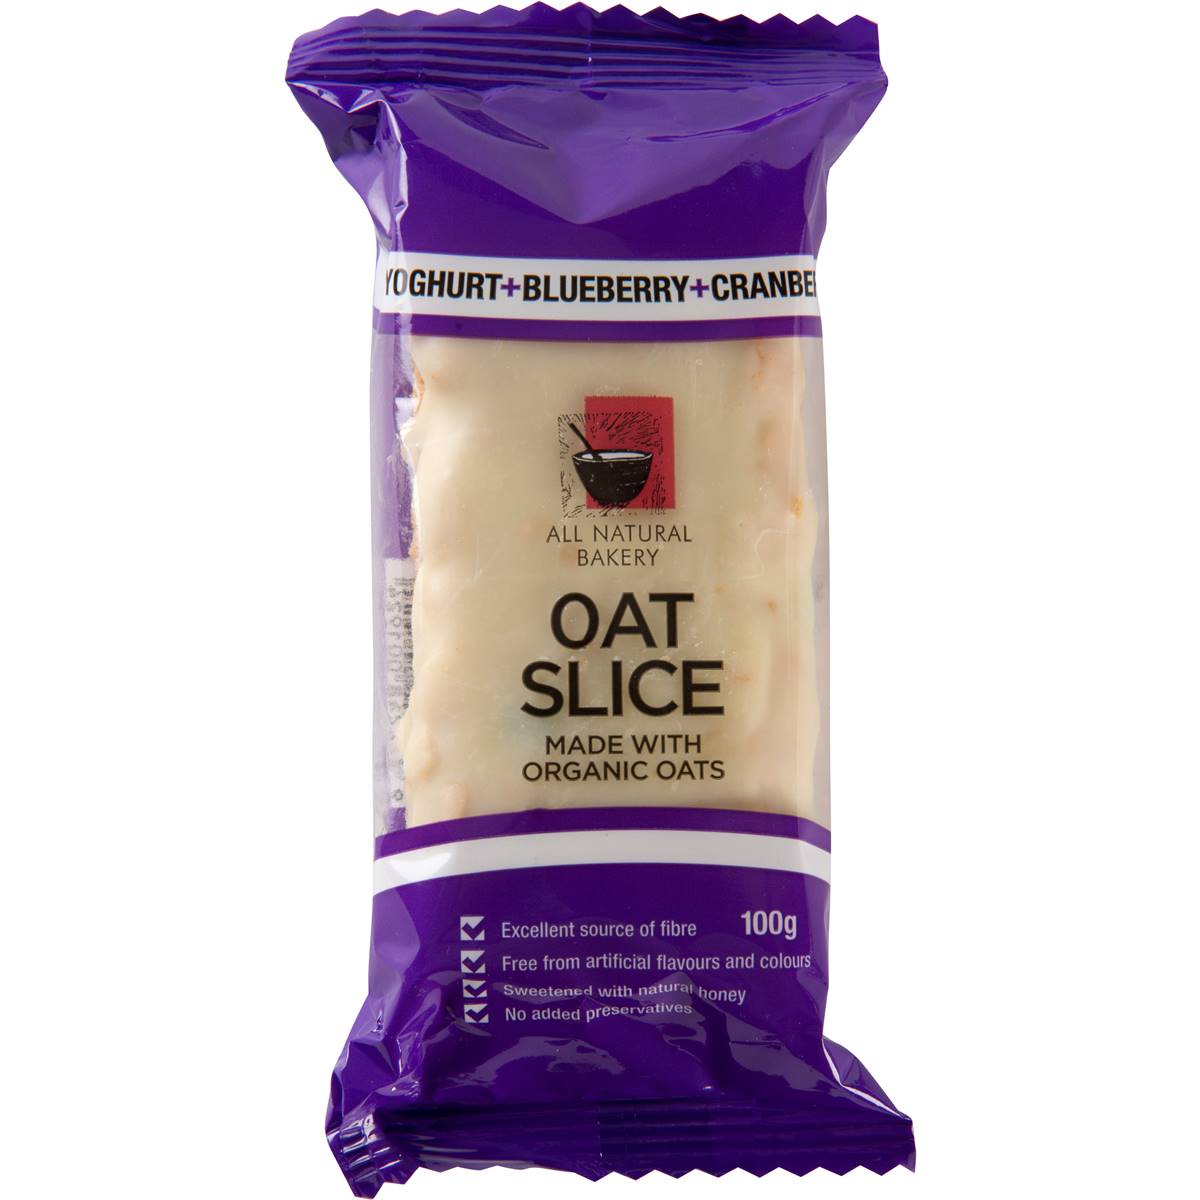 Calories in All Natural Bakery Oat Slice